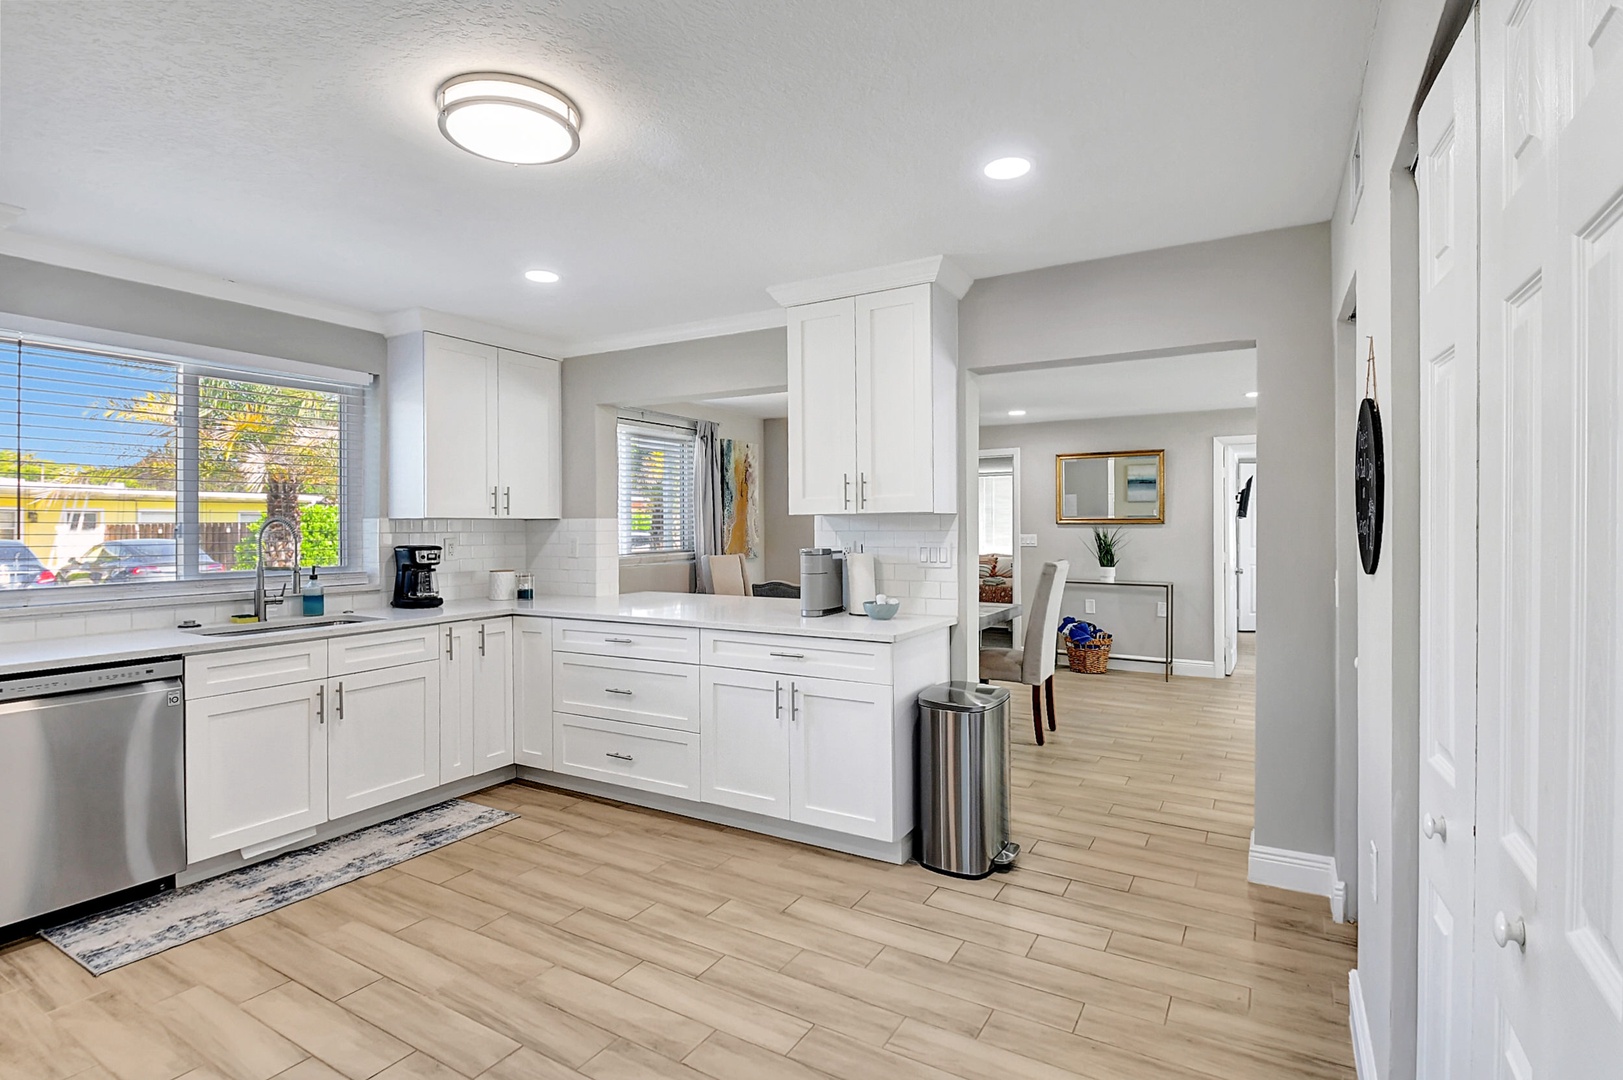 The fully updated kitchen is spacious & offers all the comforts of home